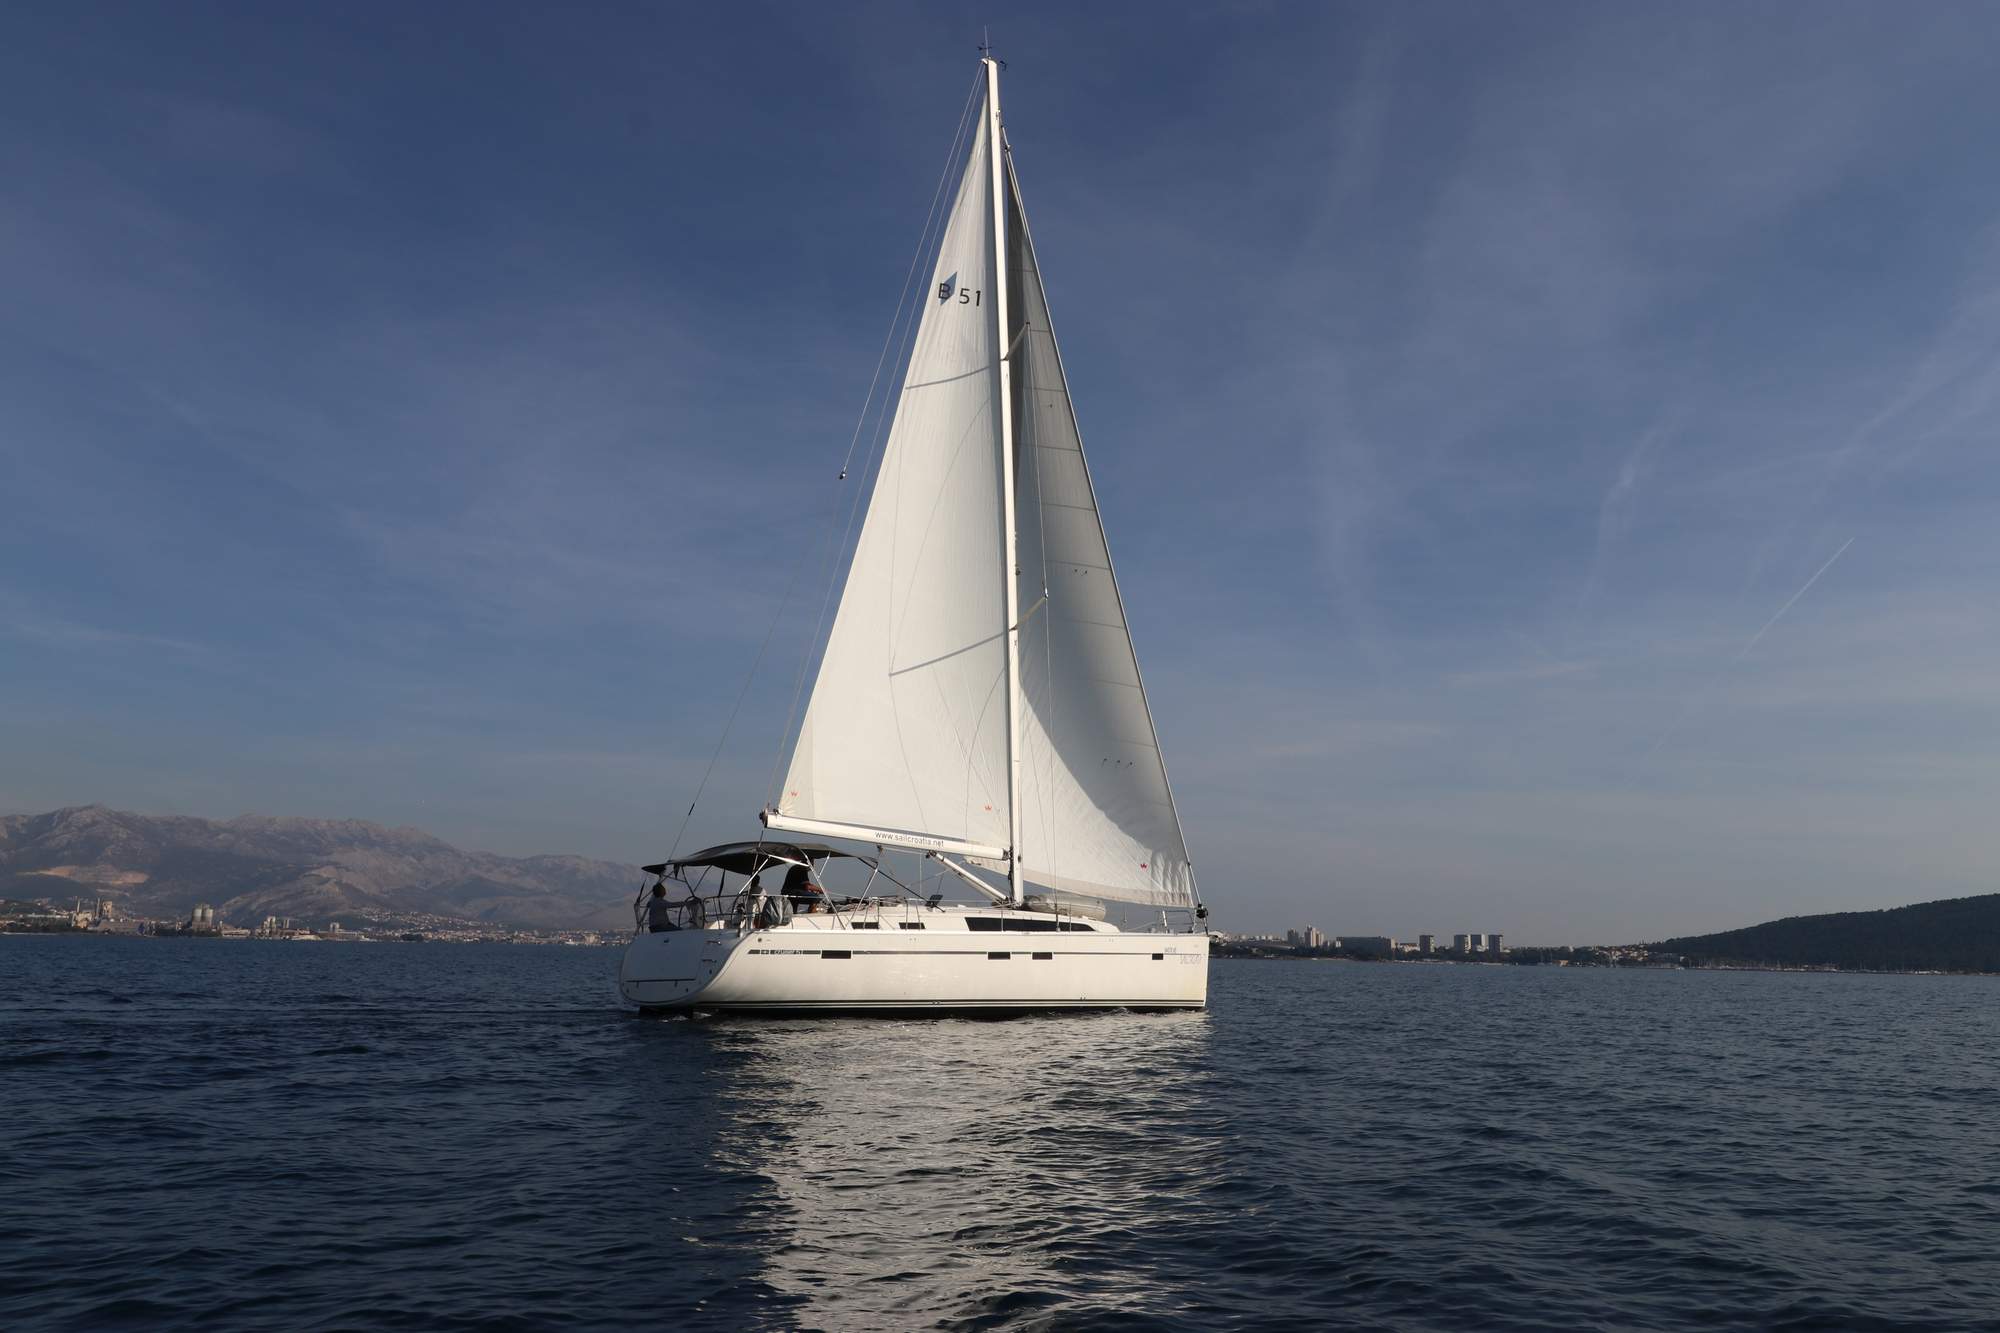 Why is June for a lot of people the best month for sailing?